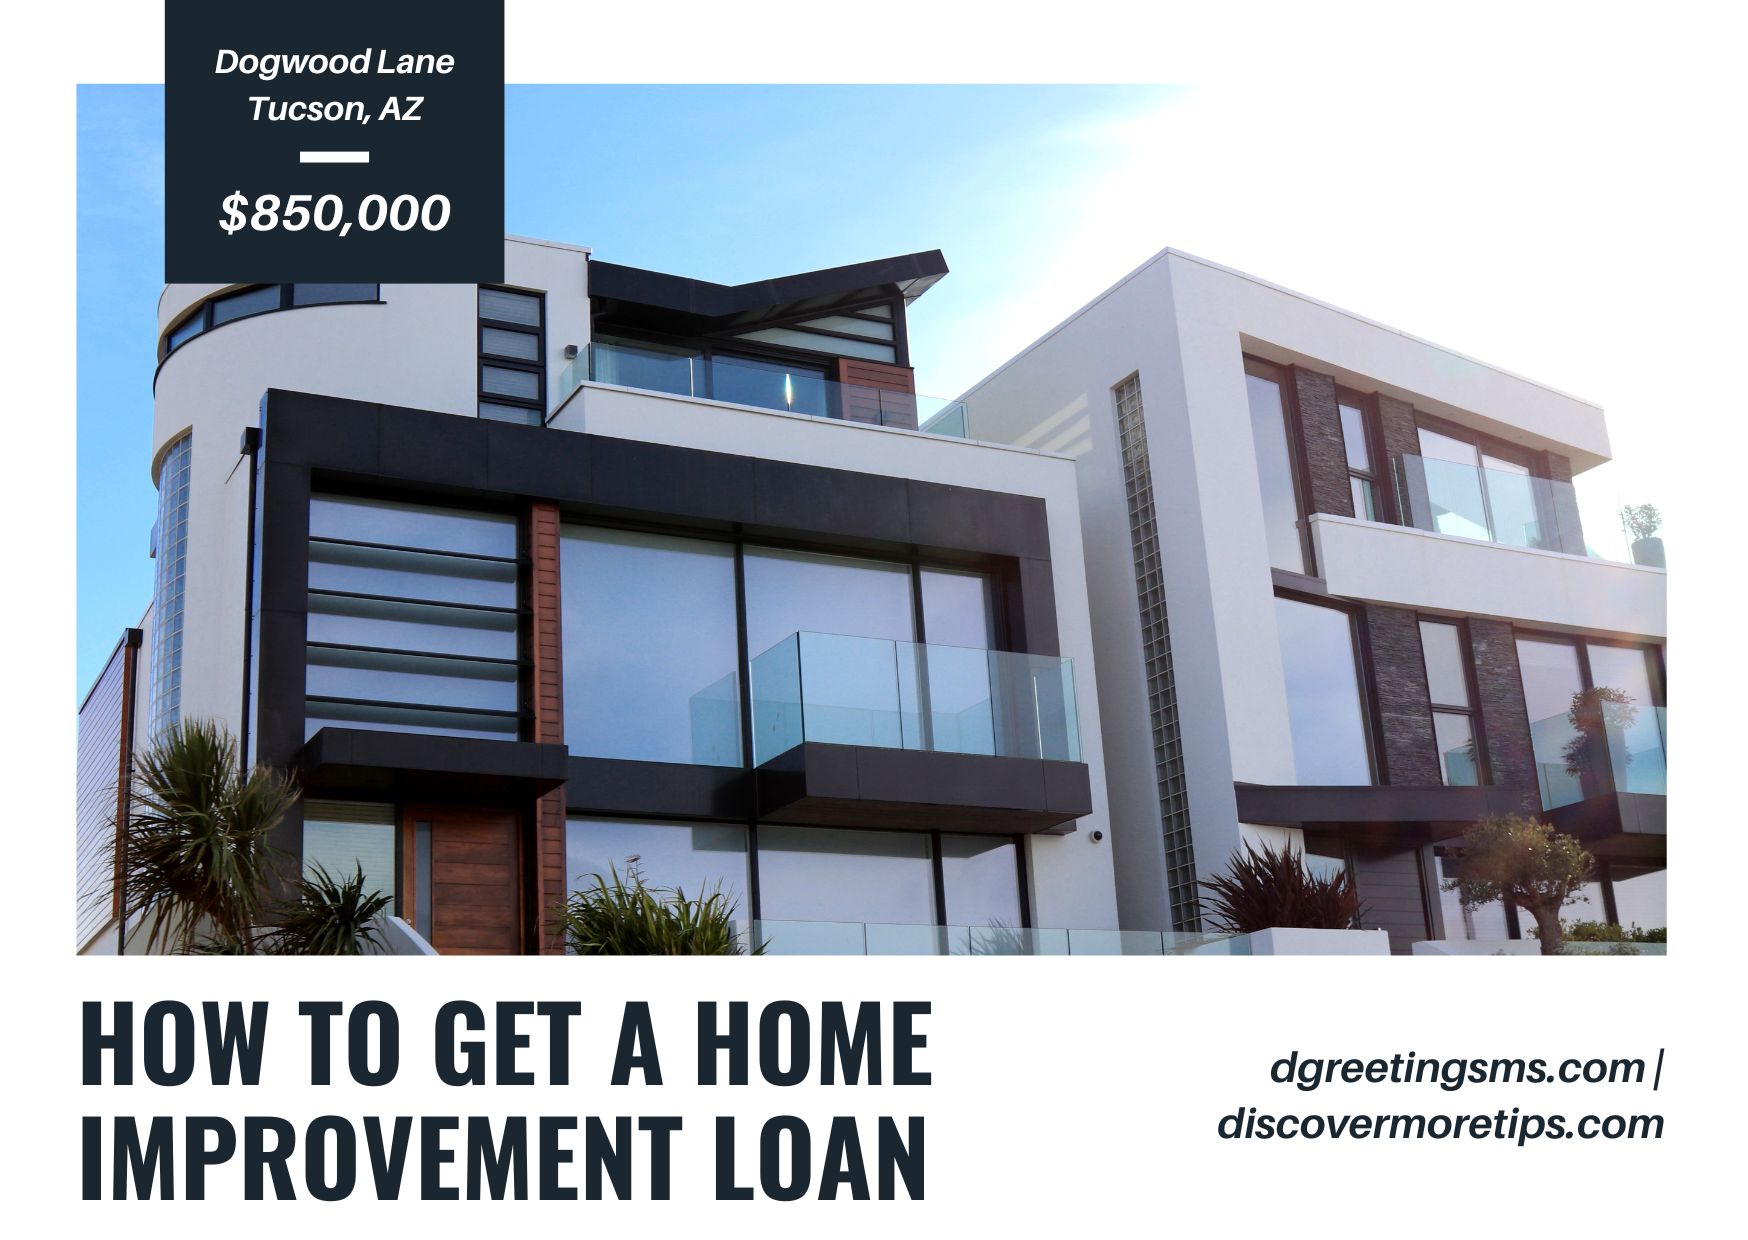 How To Get a Home Improvement Loan